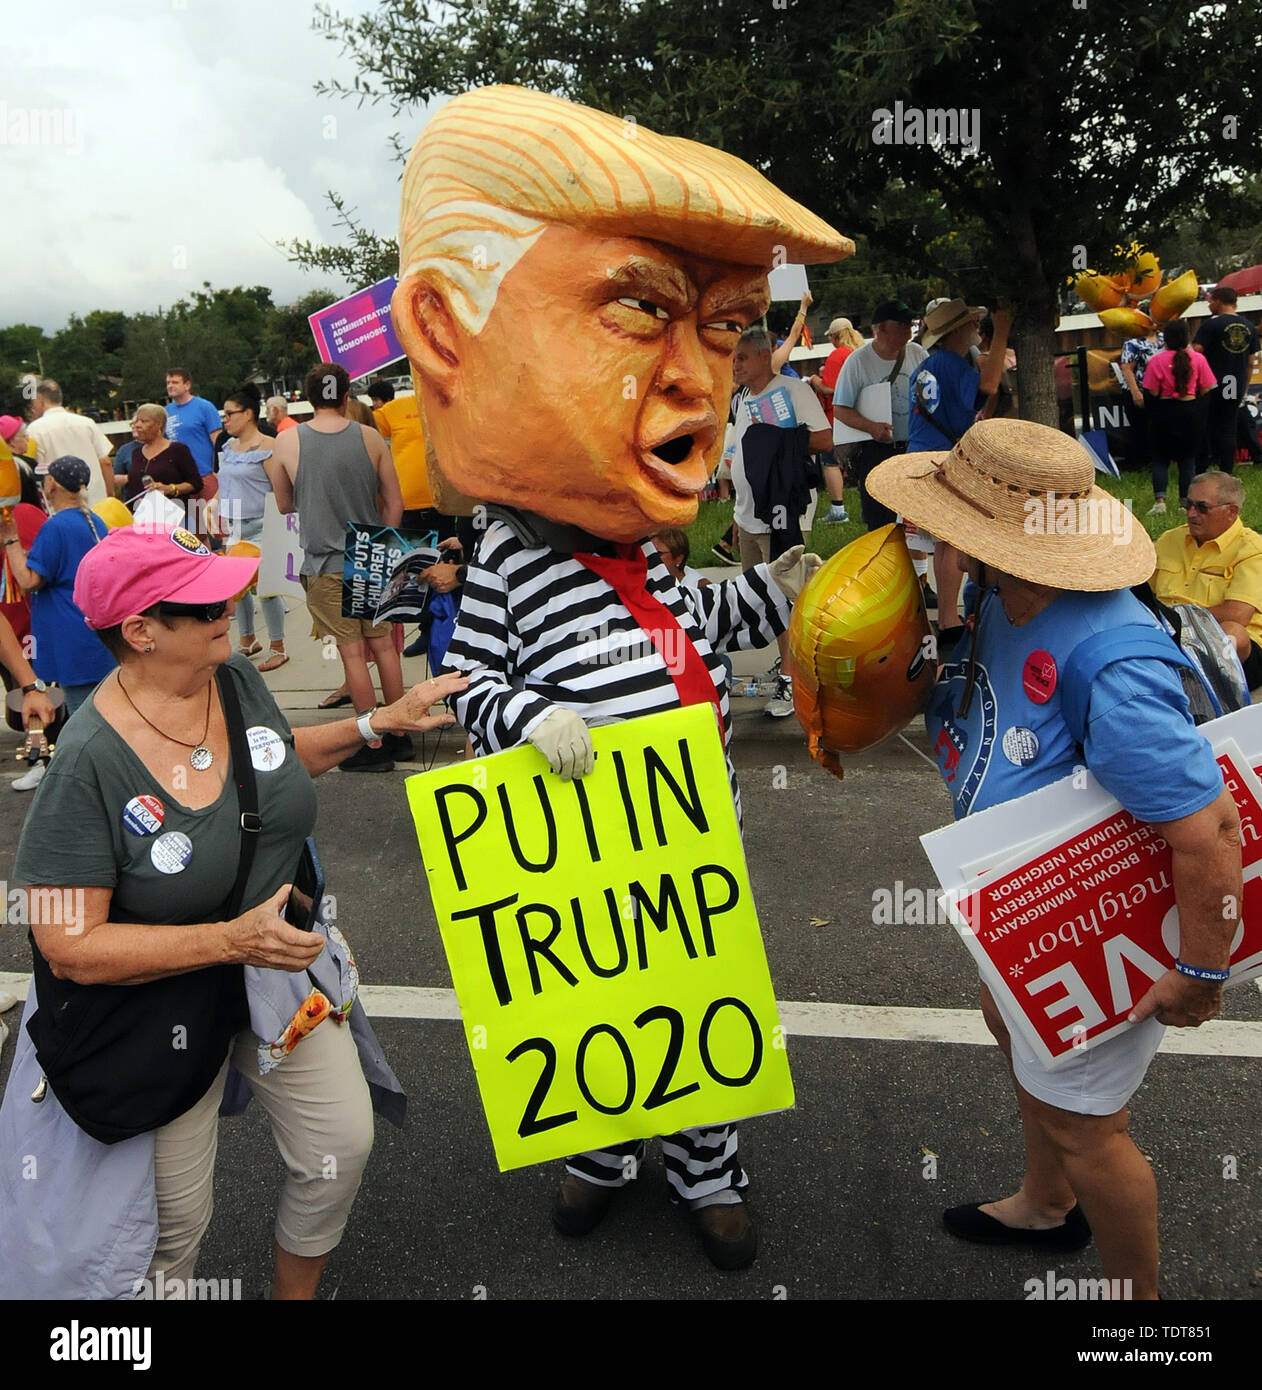 Orlando, Florida, USA. 18th June, 2019. Protesters demonstrate against U.S. President Donald Trump near the site of a Make America Great Again rally at the Amway Center on June 18, 2019 in Orlando, Florida. The rally is billed as Trump's kick-off event for his campaign for re-election in 2020. Credit: Paul Hennessy/Alamy Live News Stock Photo